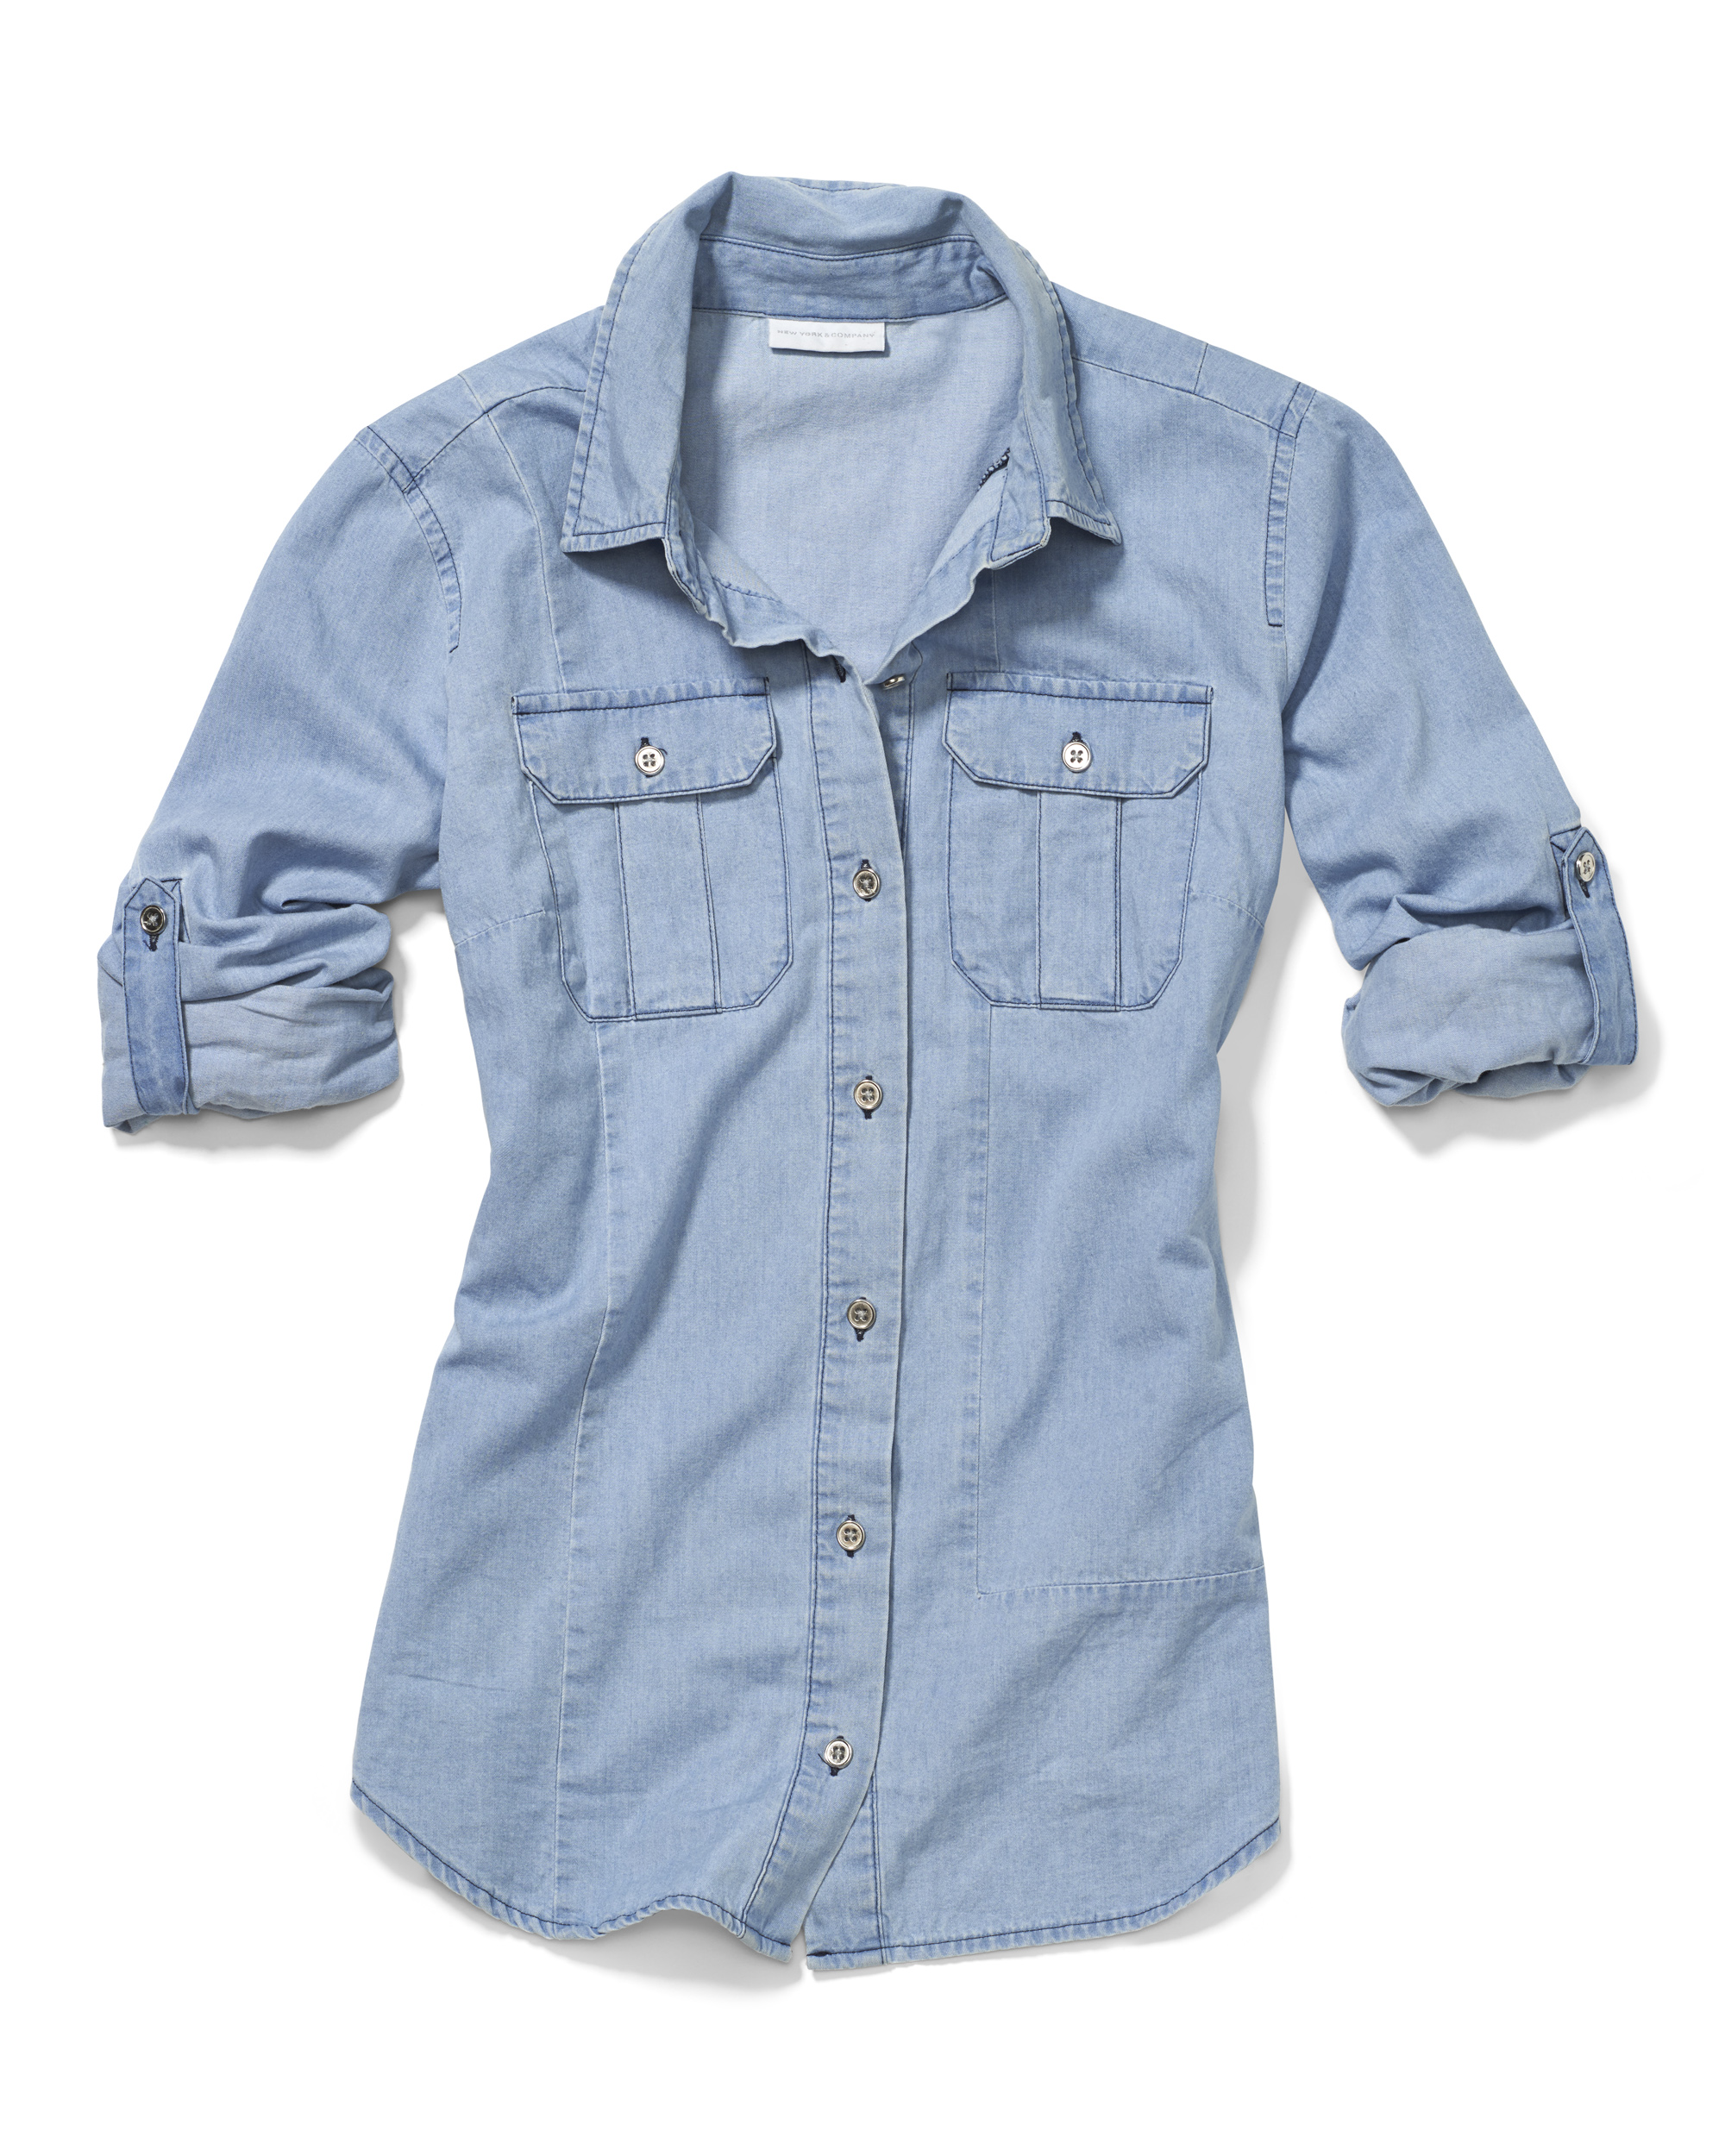 a product photograph of a denim shirt with soft styling on white